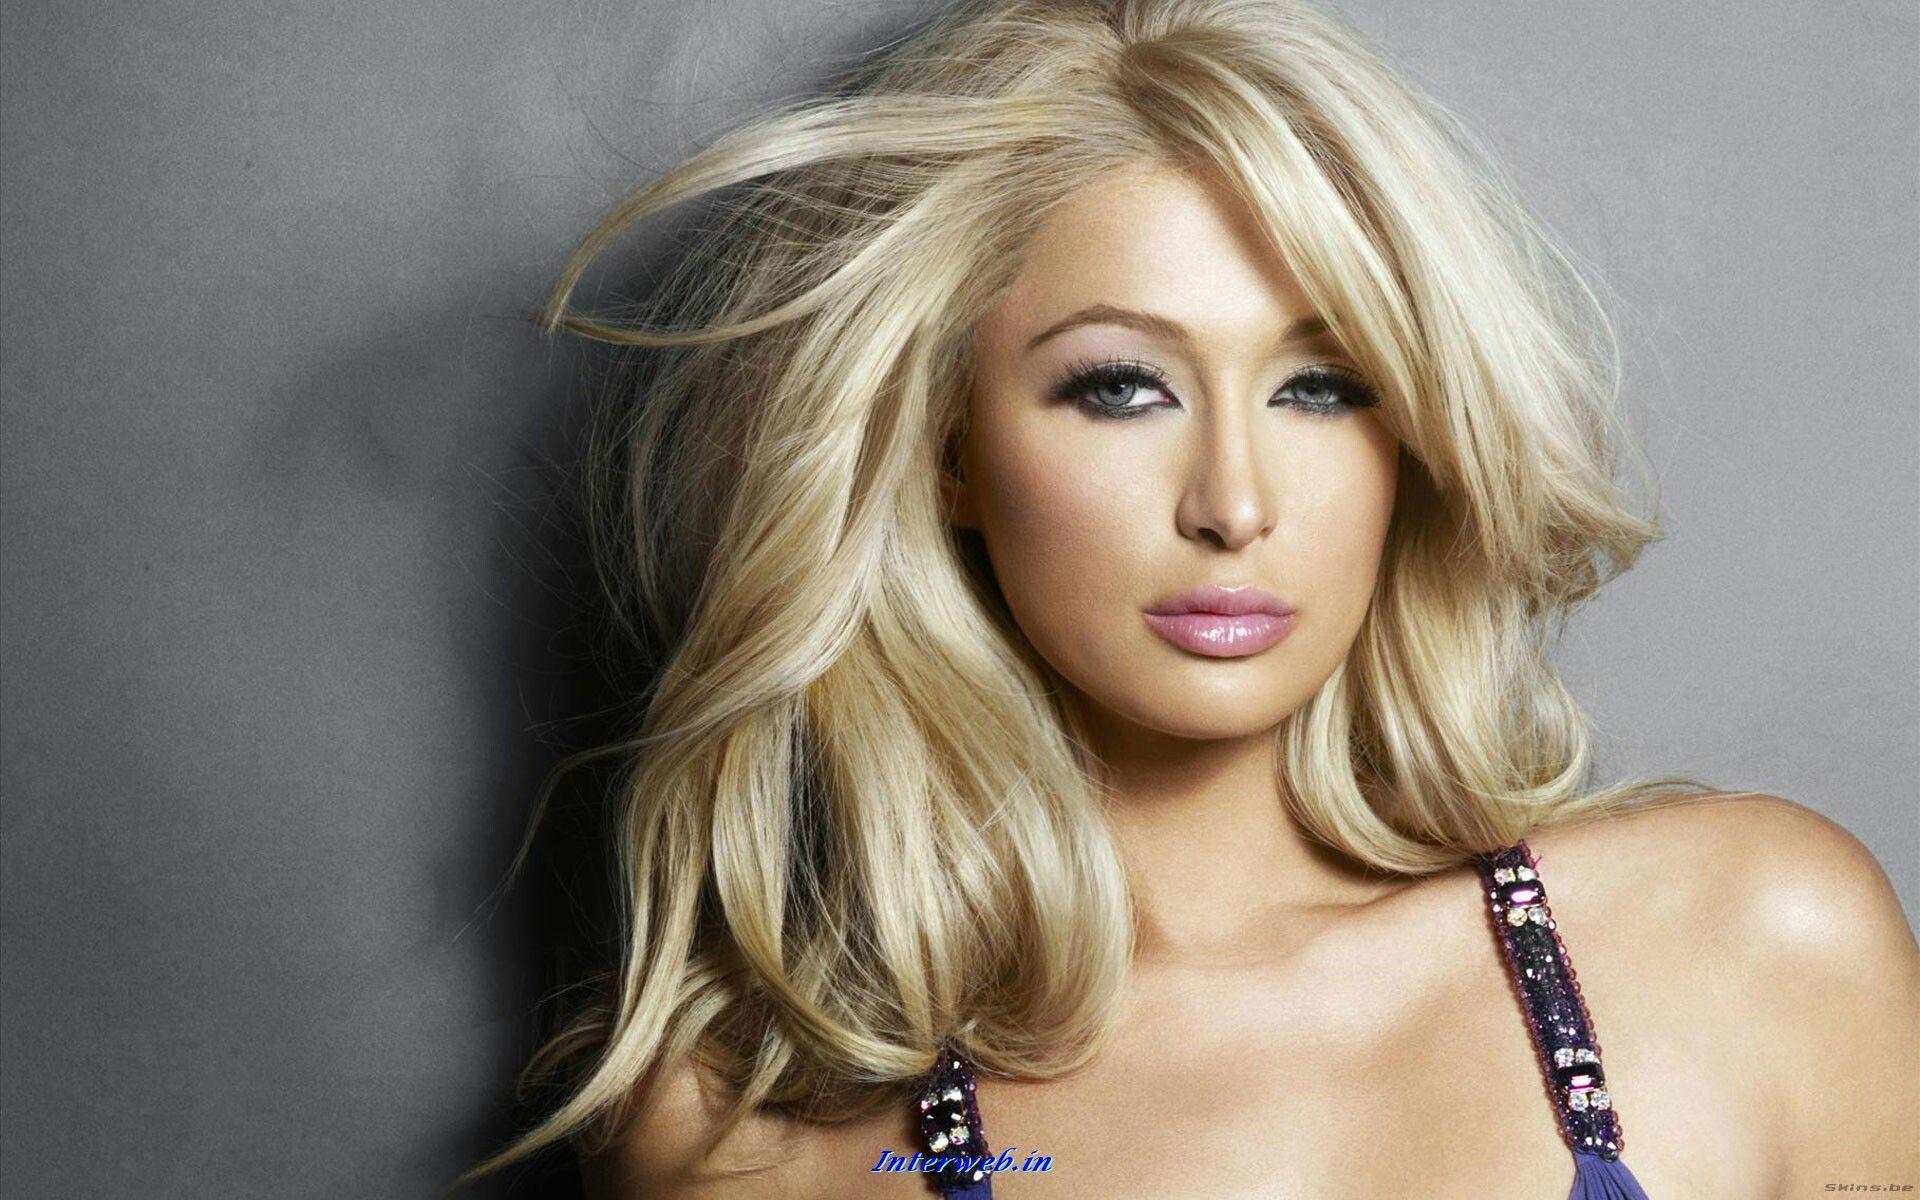 Paris Hilton Wallpaper High Resolution and Quality Download